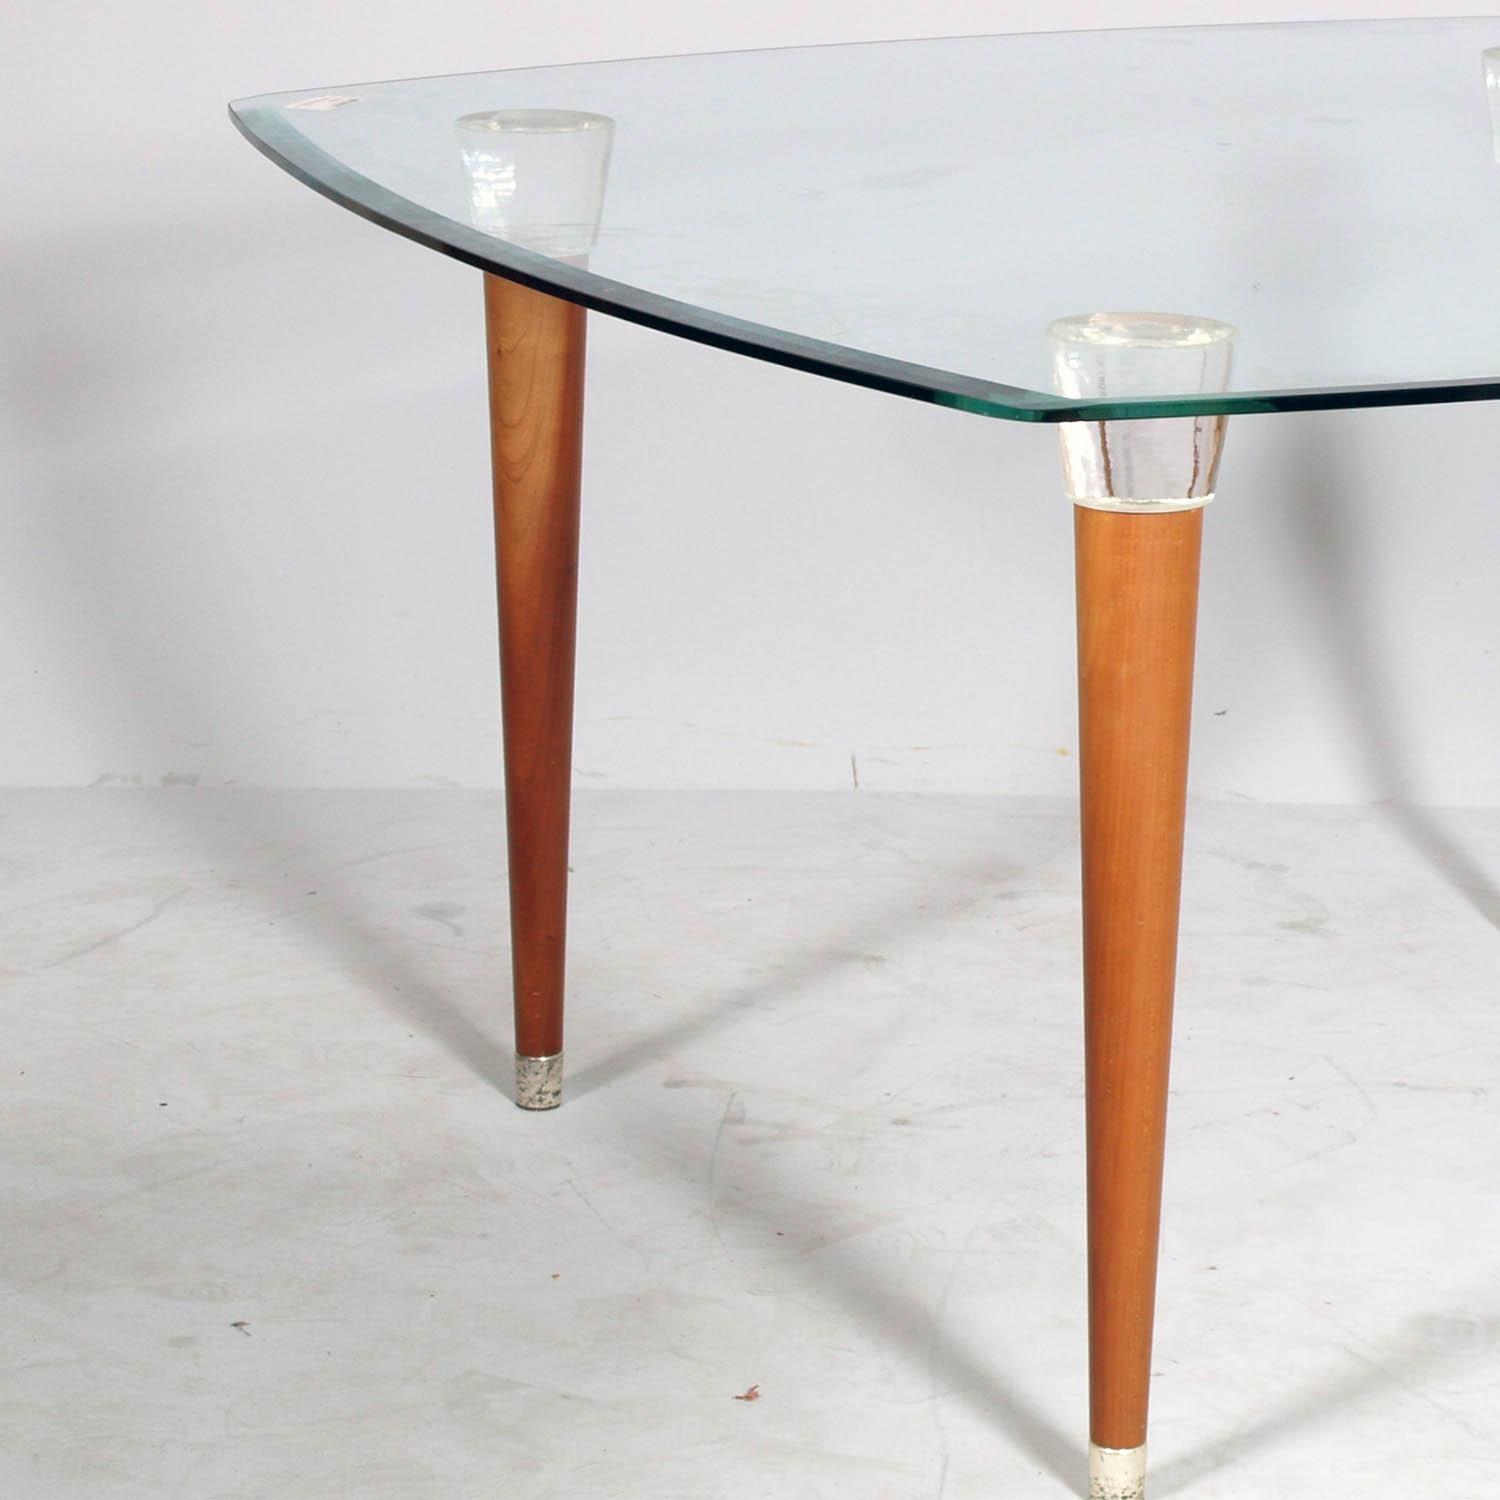 Italian Mid-Century Modern Table, Glass Top, Walnut , by Ico Parisi Murano Glass Heads For Sale